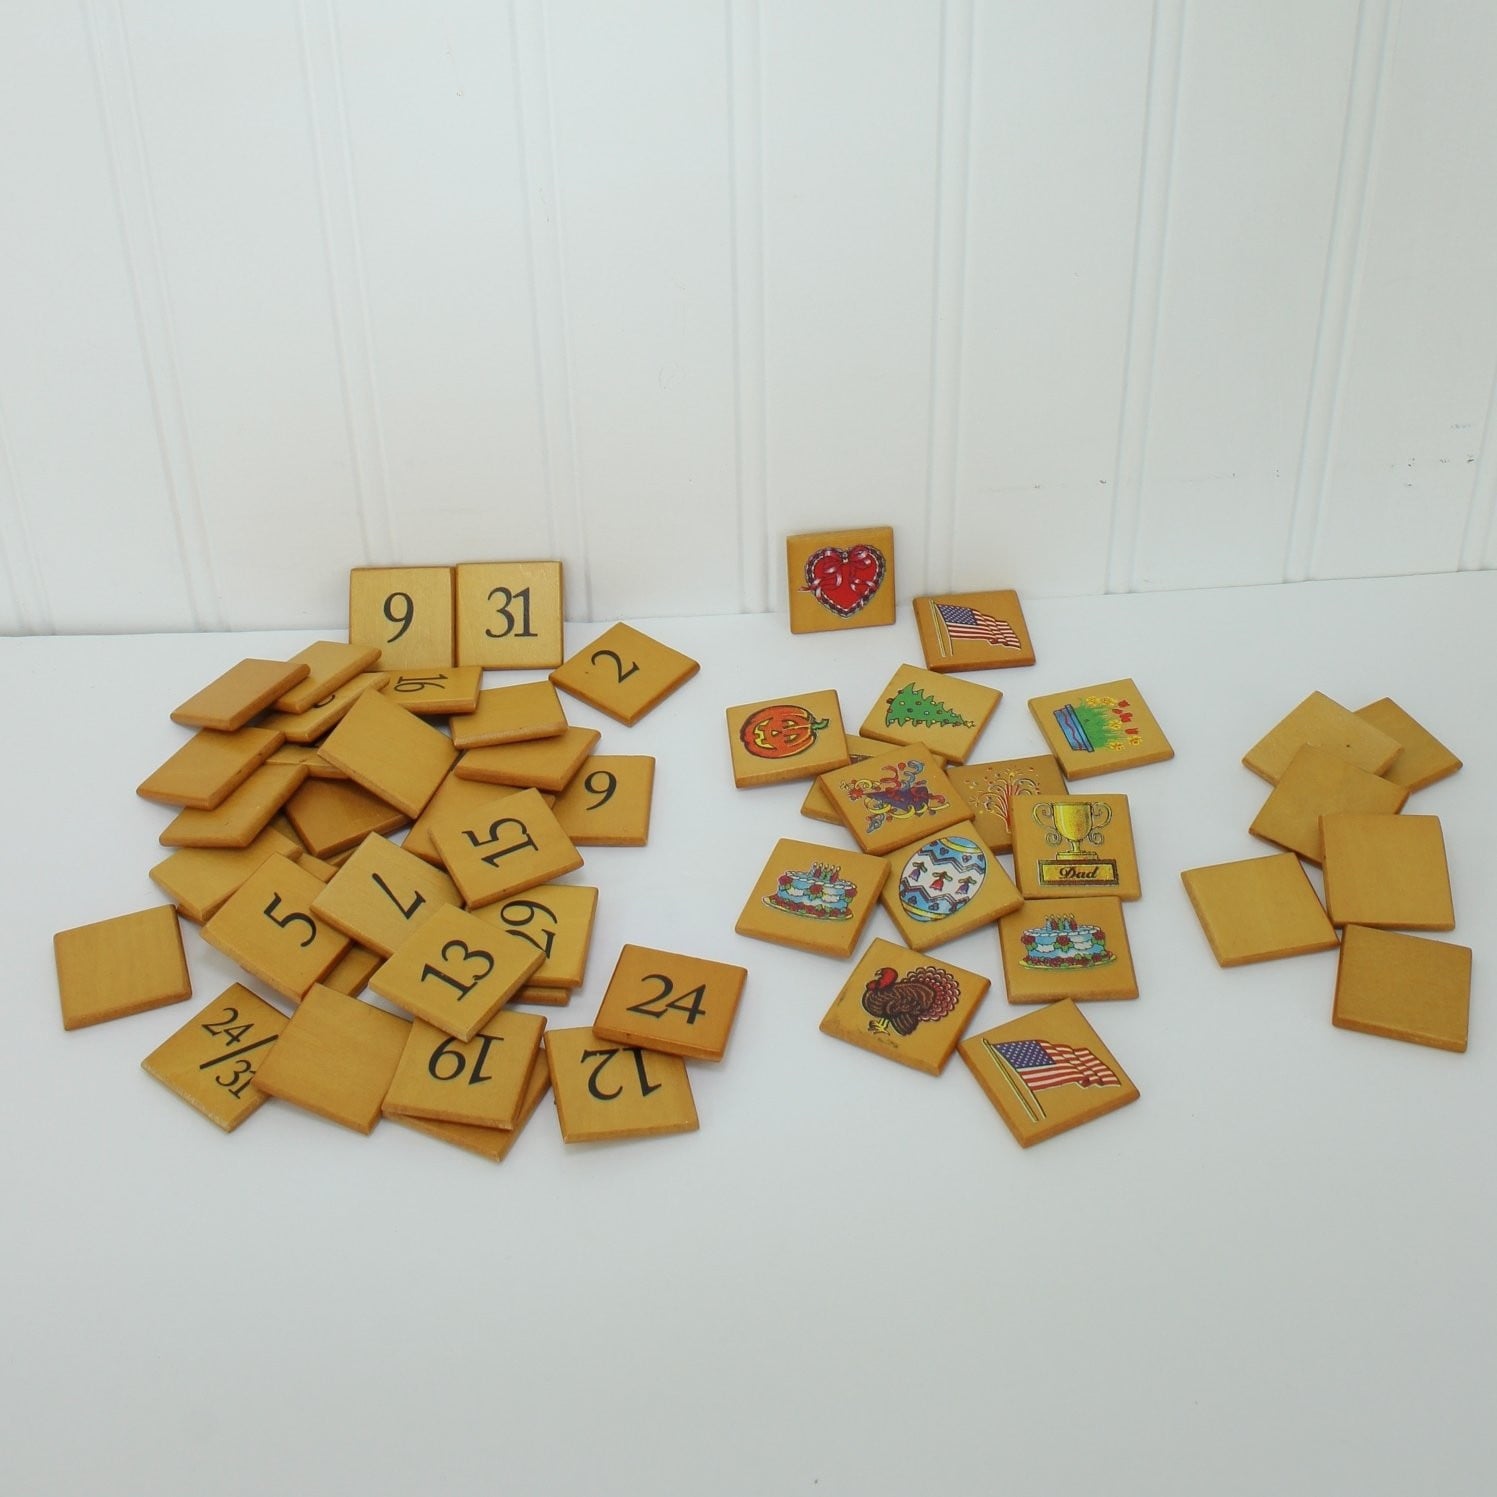 Wood Finished Beveled Tiles 54 Pictures Numbers Blanks Scrapbooks Collage Projects DIY